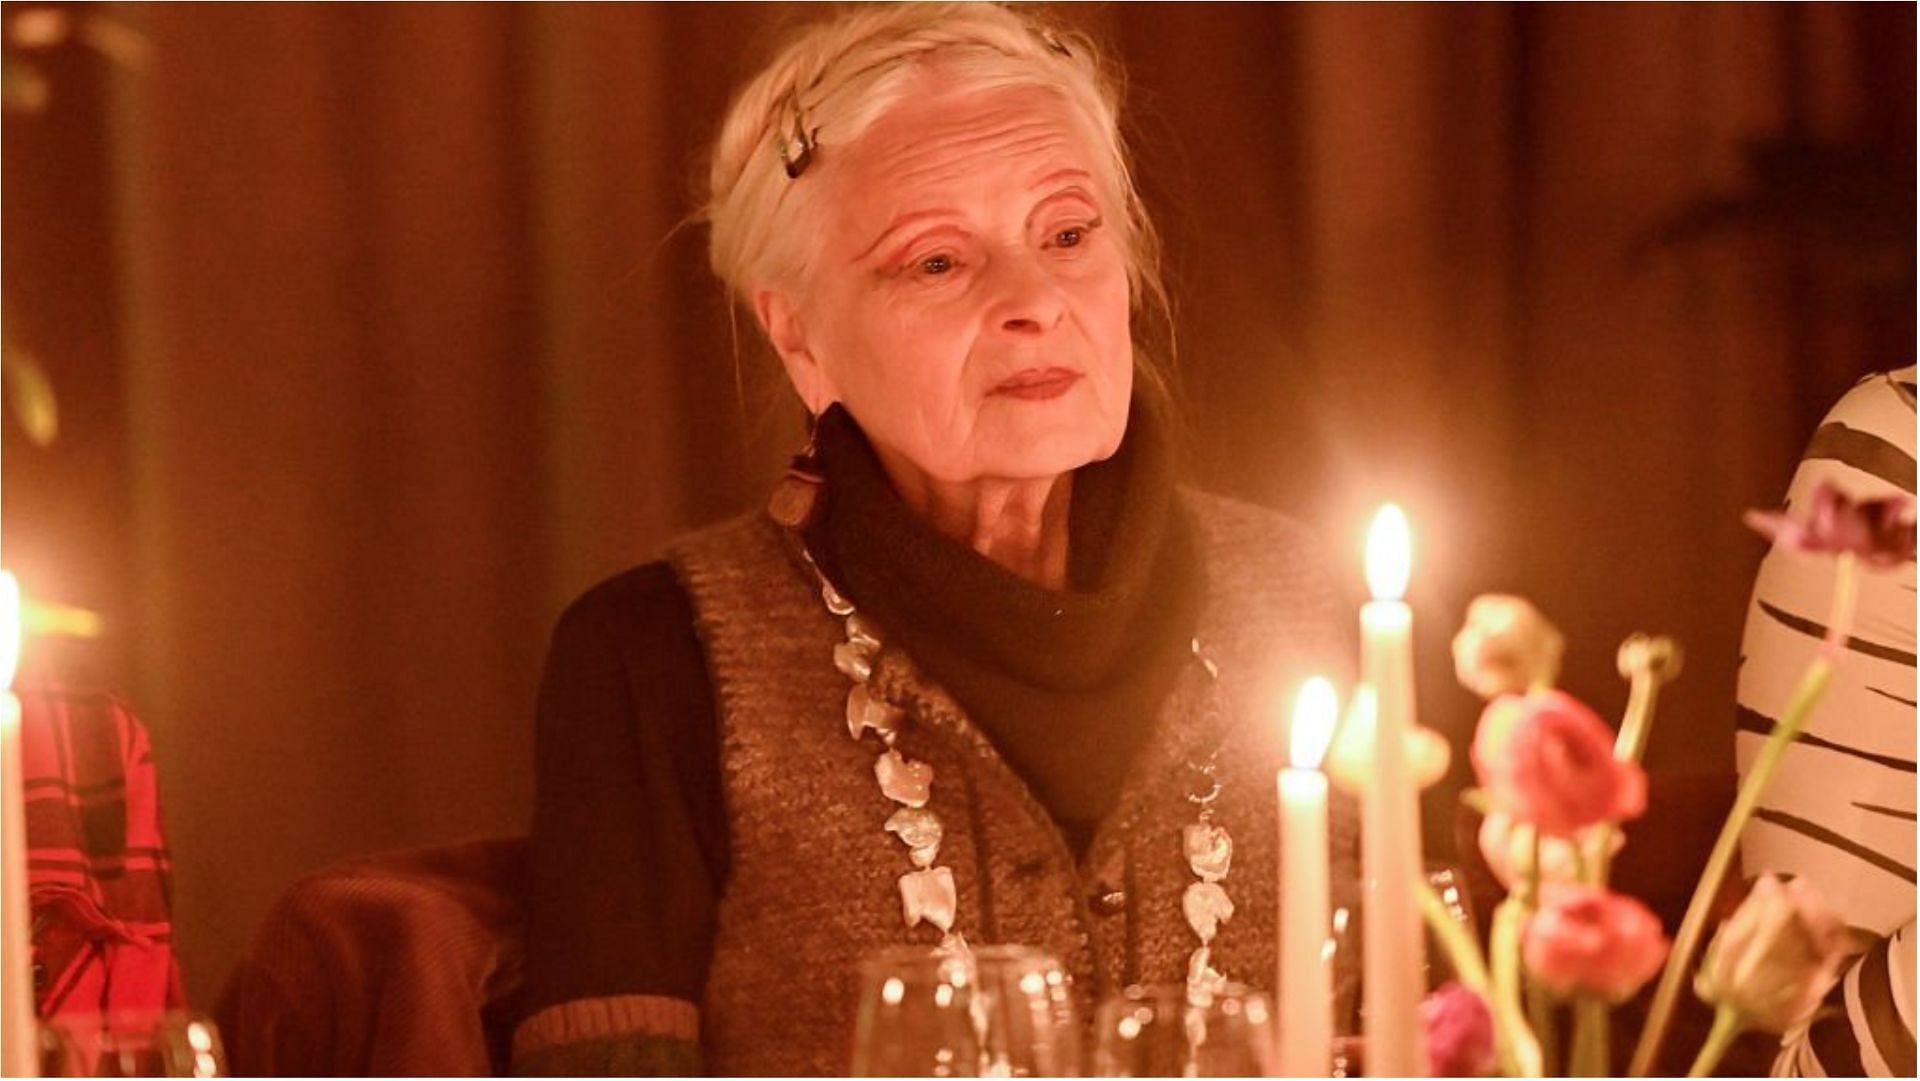 Vivienne Westwood recently died at the age of 81 (Image via Samier Hussein/Getty Images)